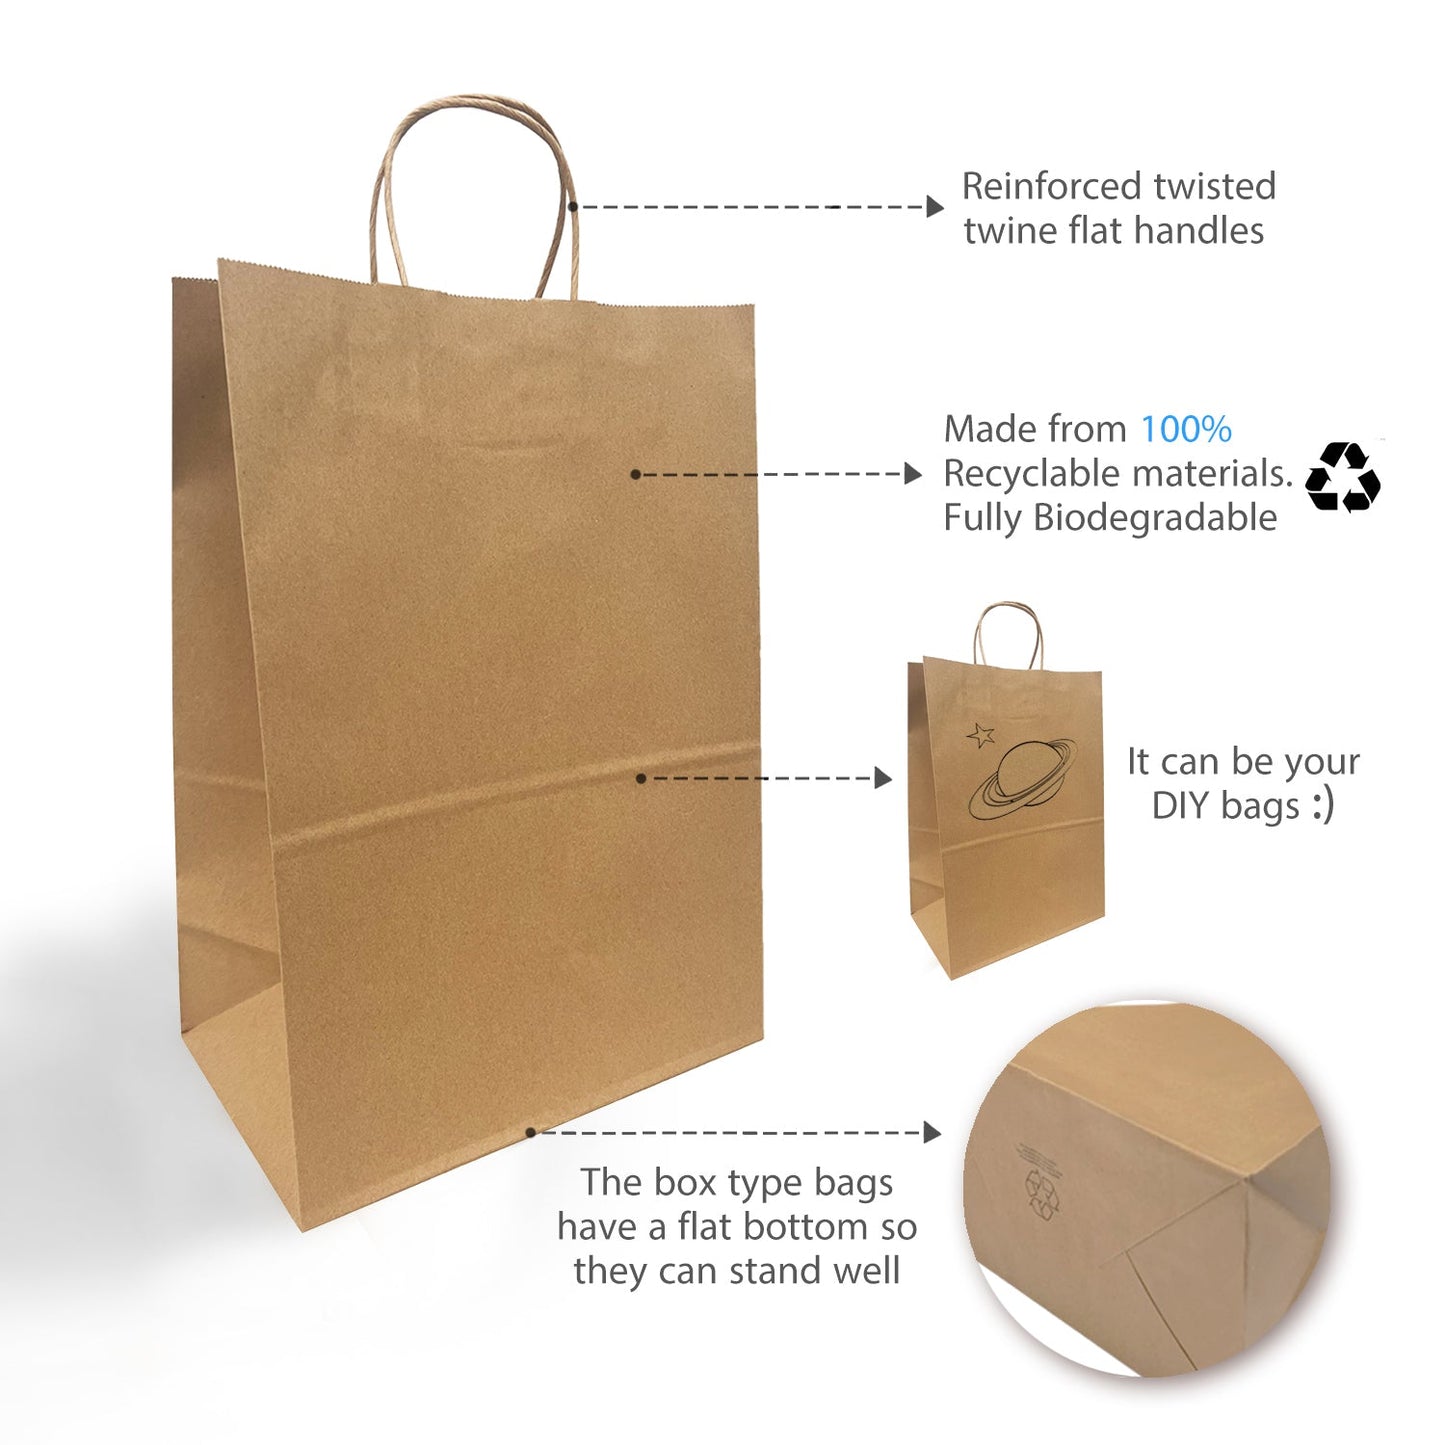 250 Pcs, Simba, 12x7x14 inches, Kraft Paper Bags, with Twisted Handle